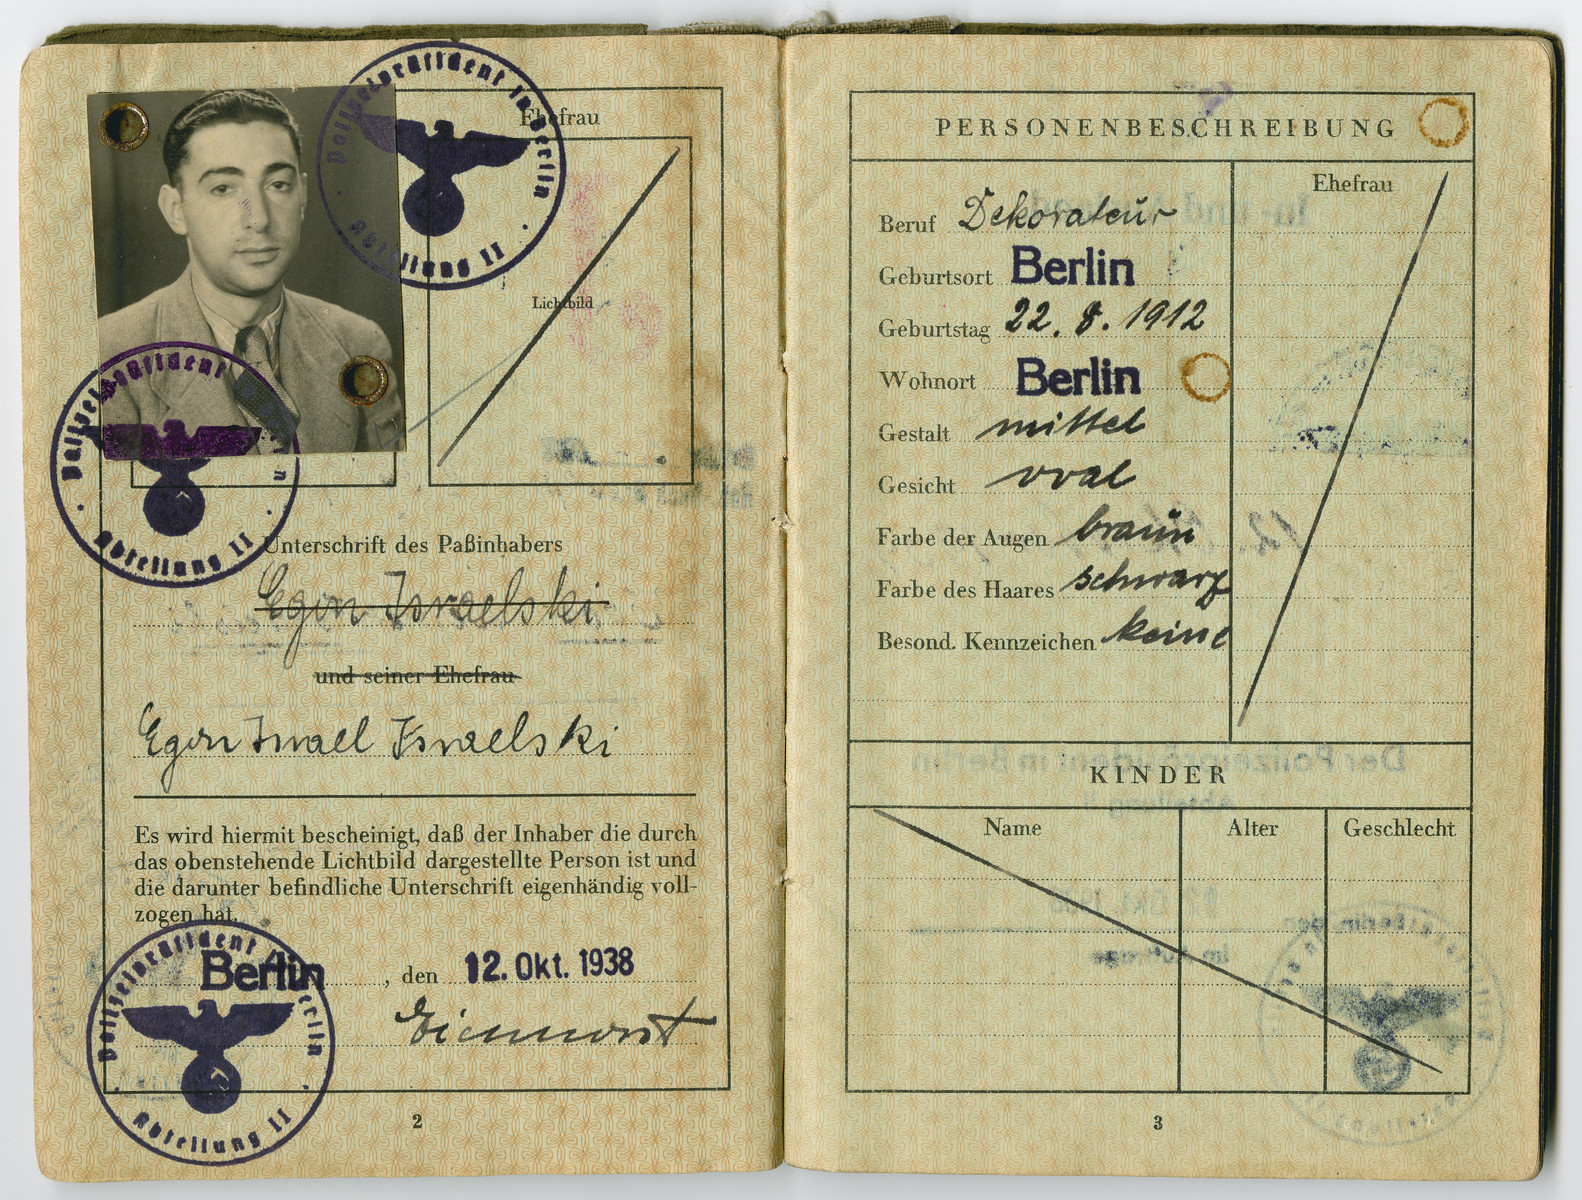 Egon Israelski's German passport showing his forced name change to include the middle name of Israel.

The Jews were not allowed to have Aryan names on their passports, so all of the boys were named Israel and the girls were Sara.